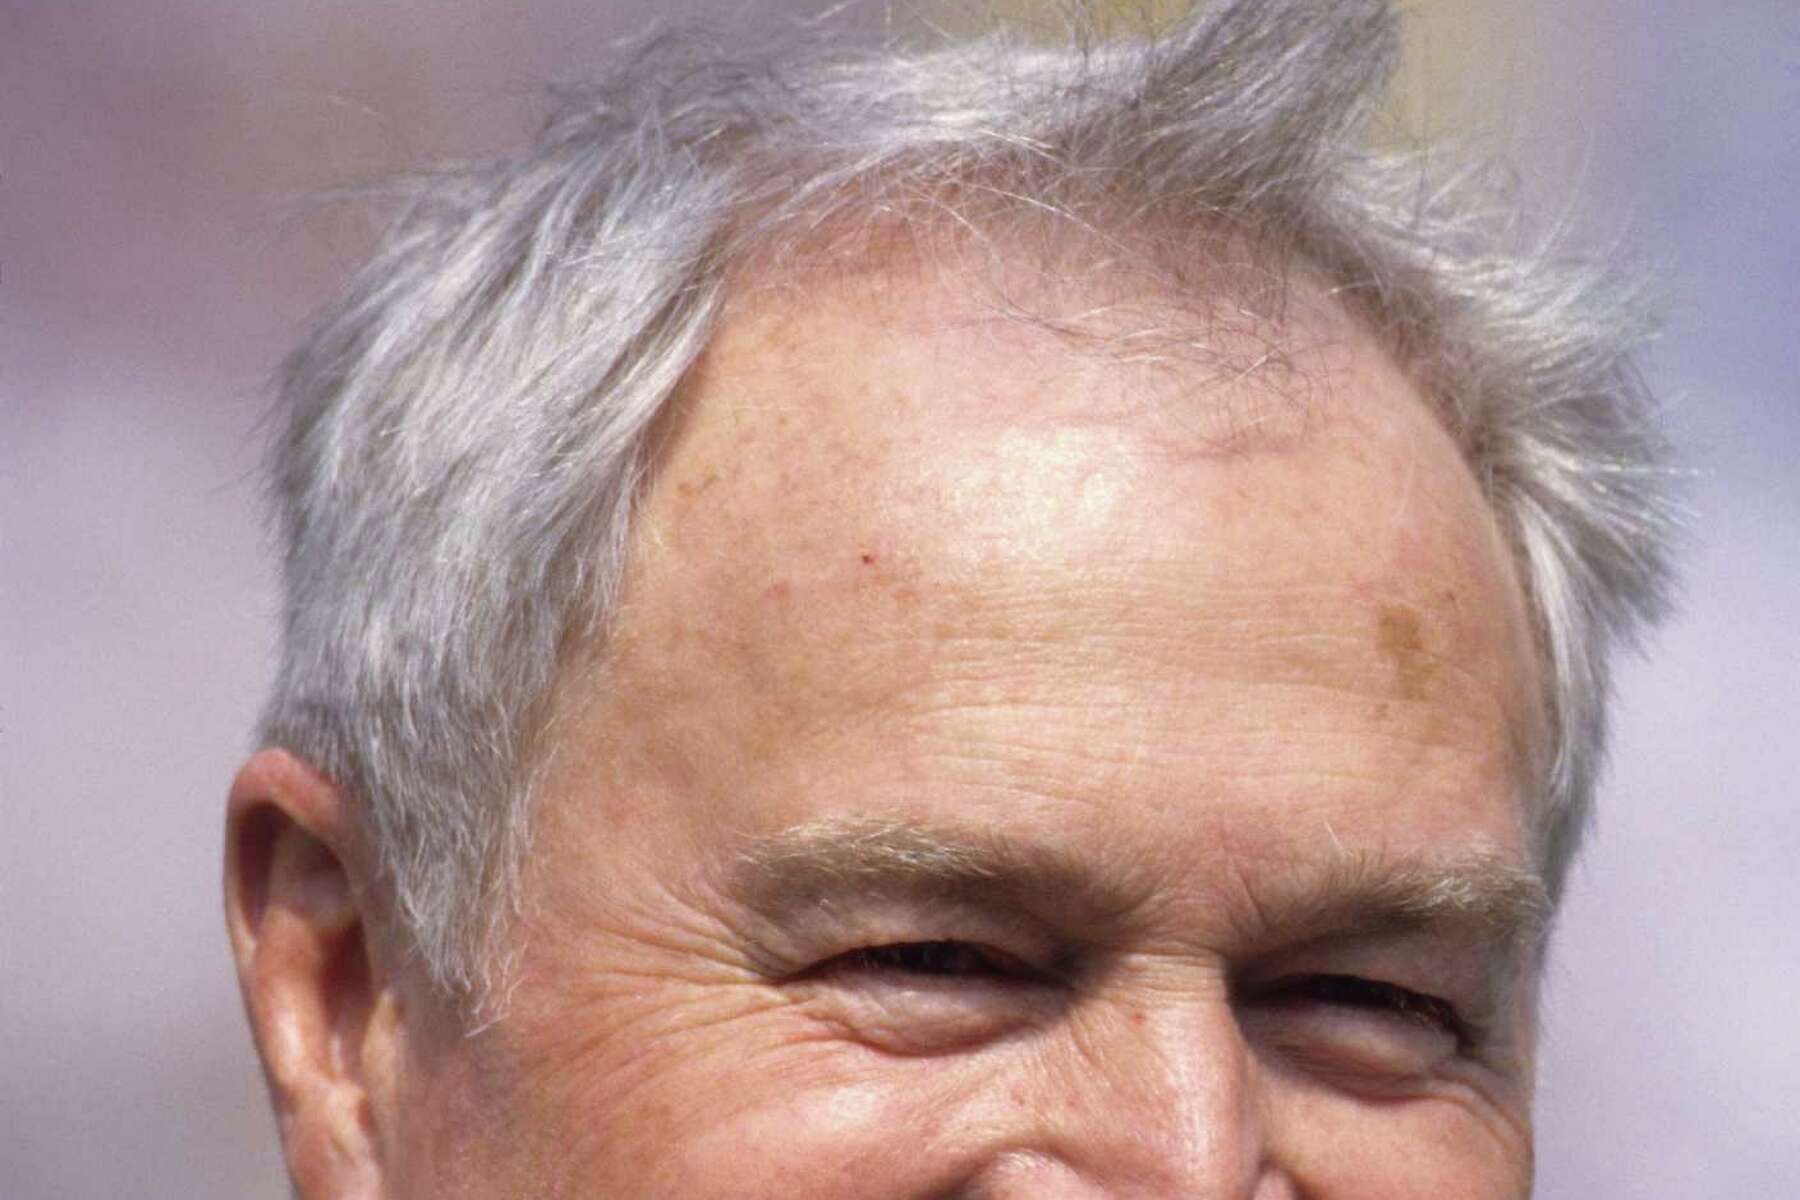 Hall of Fame coach Chuck Noll dead at 82